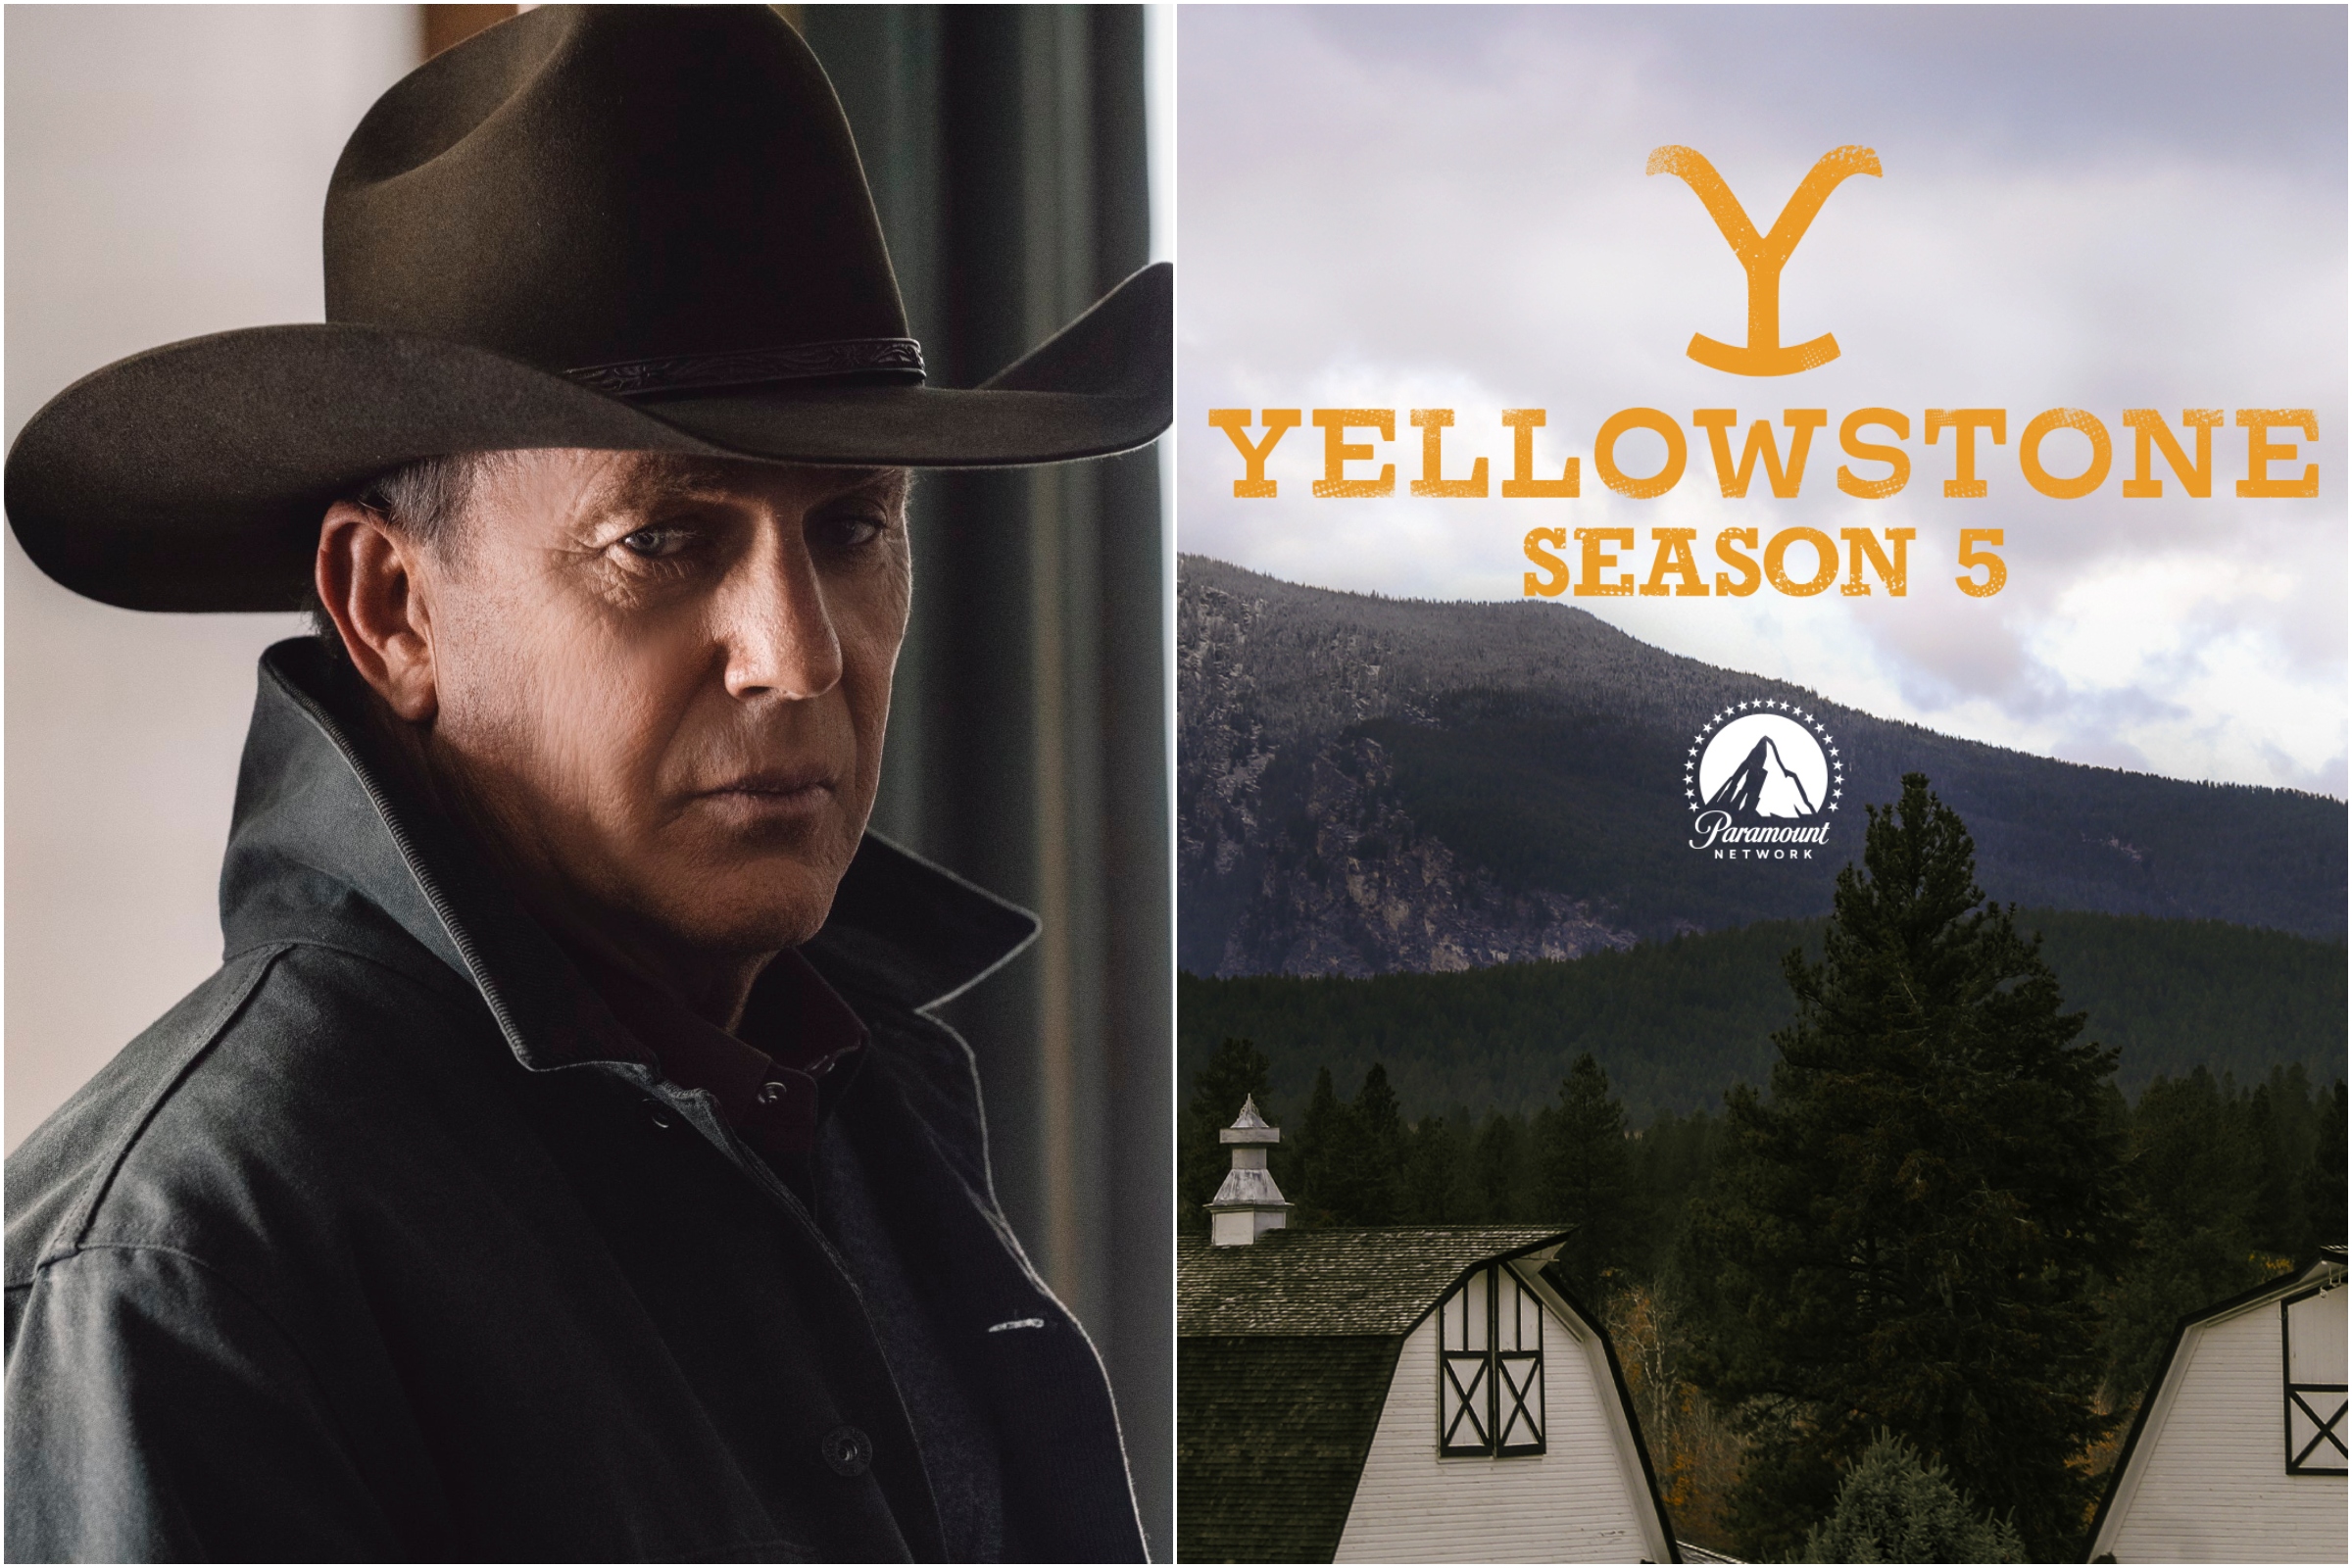 Paramount Confirms 'Yellowstone' Will Return for Season 5 and New Cast